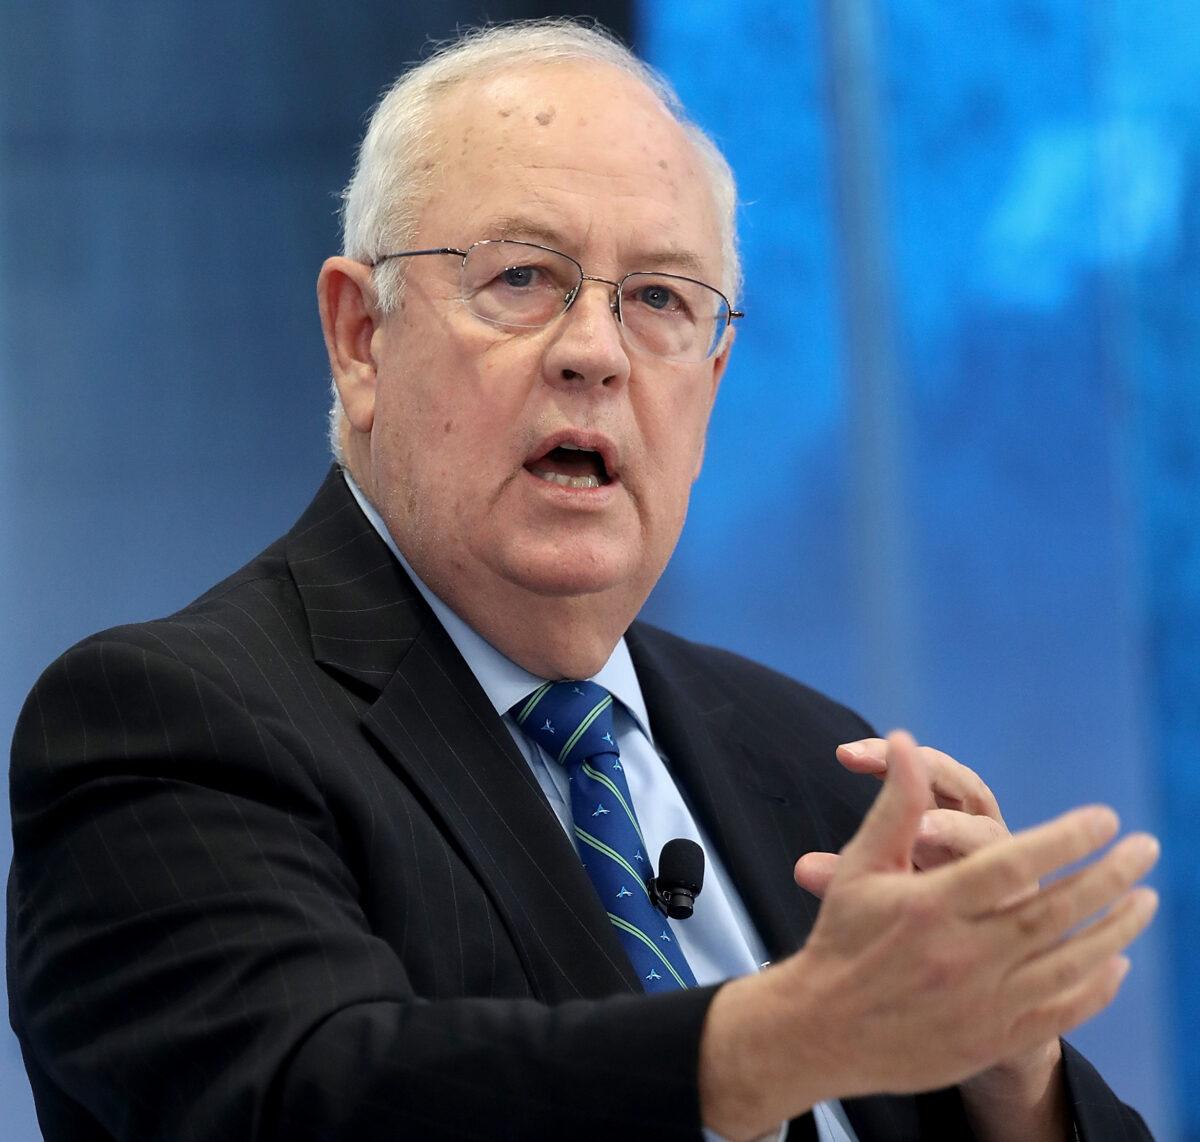 Former Independent Counsel Ken Starr answers questions during a discussion held at the American Enterprise Institute in Washington, on Sept. 18, 2018. (Win McNamee/Getty Images)